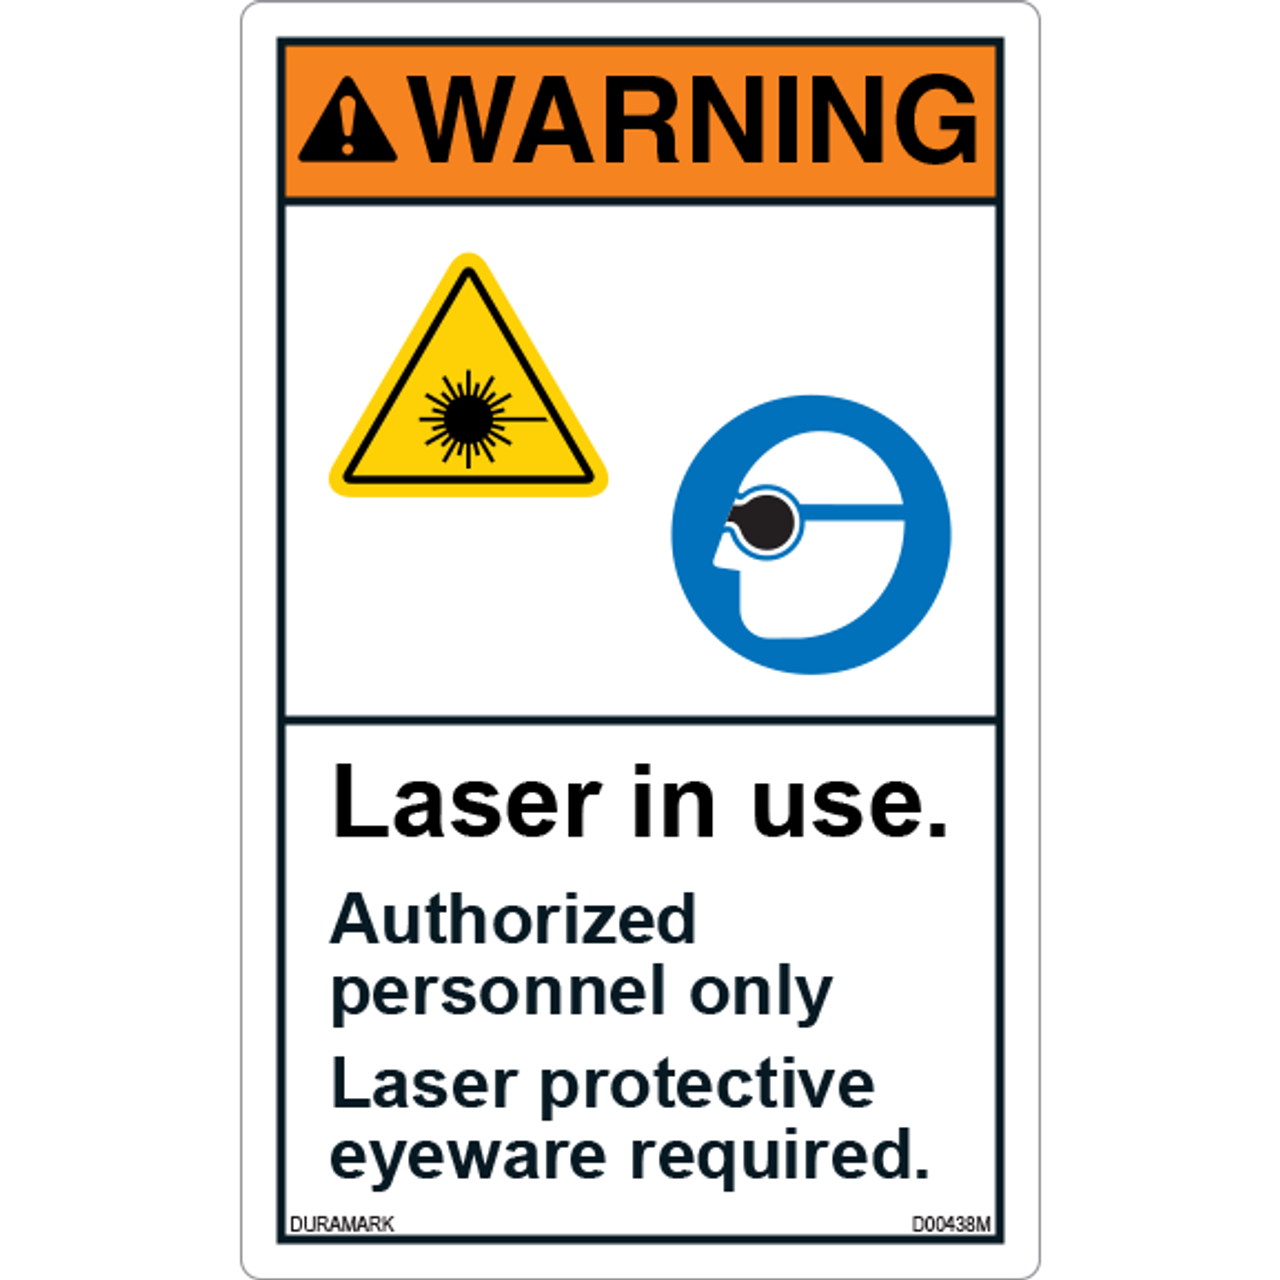 ANSI Safety Label - Warning - Laser in Use - Protective Eyeware Required - Vertical